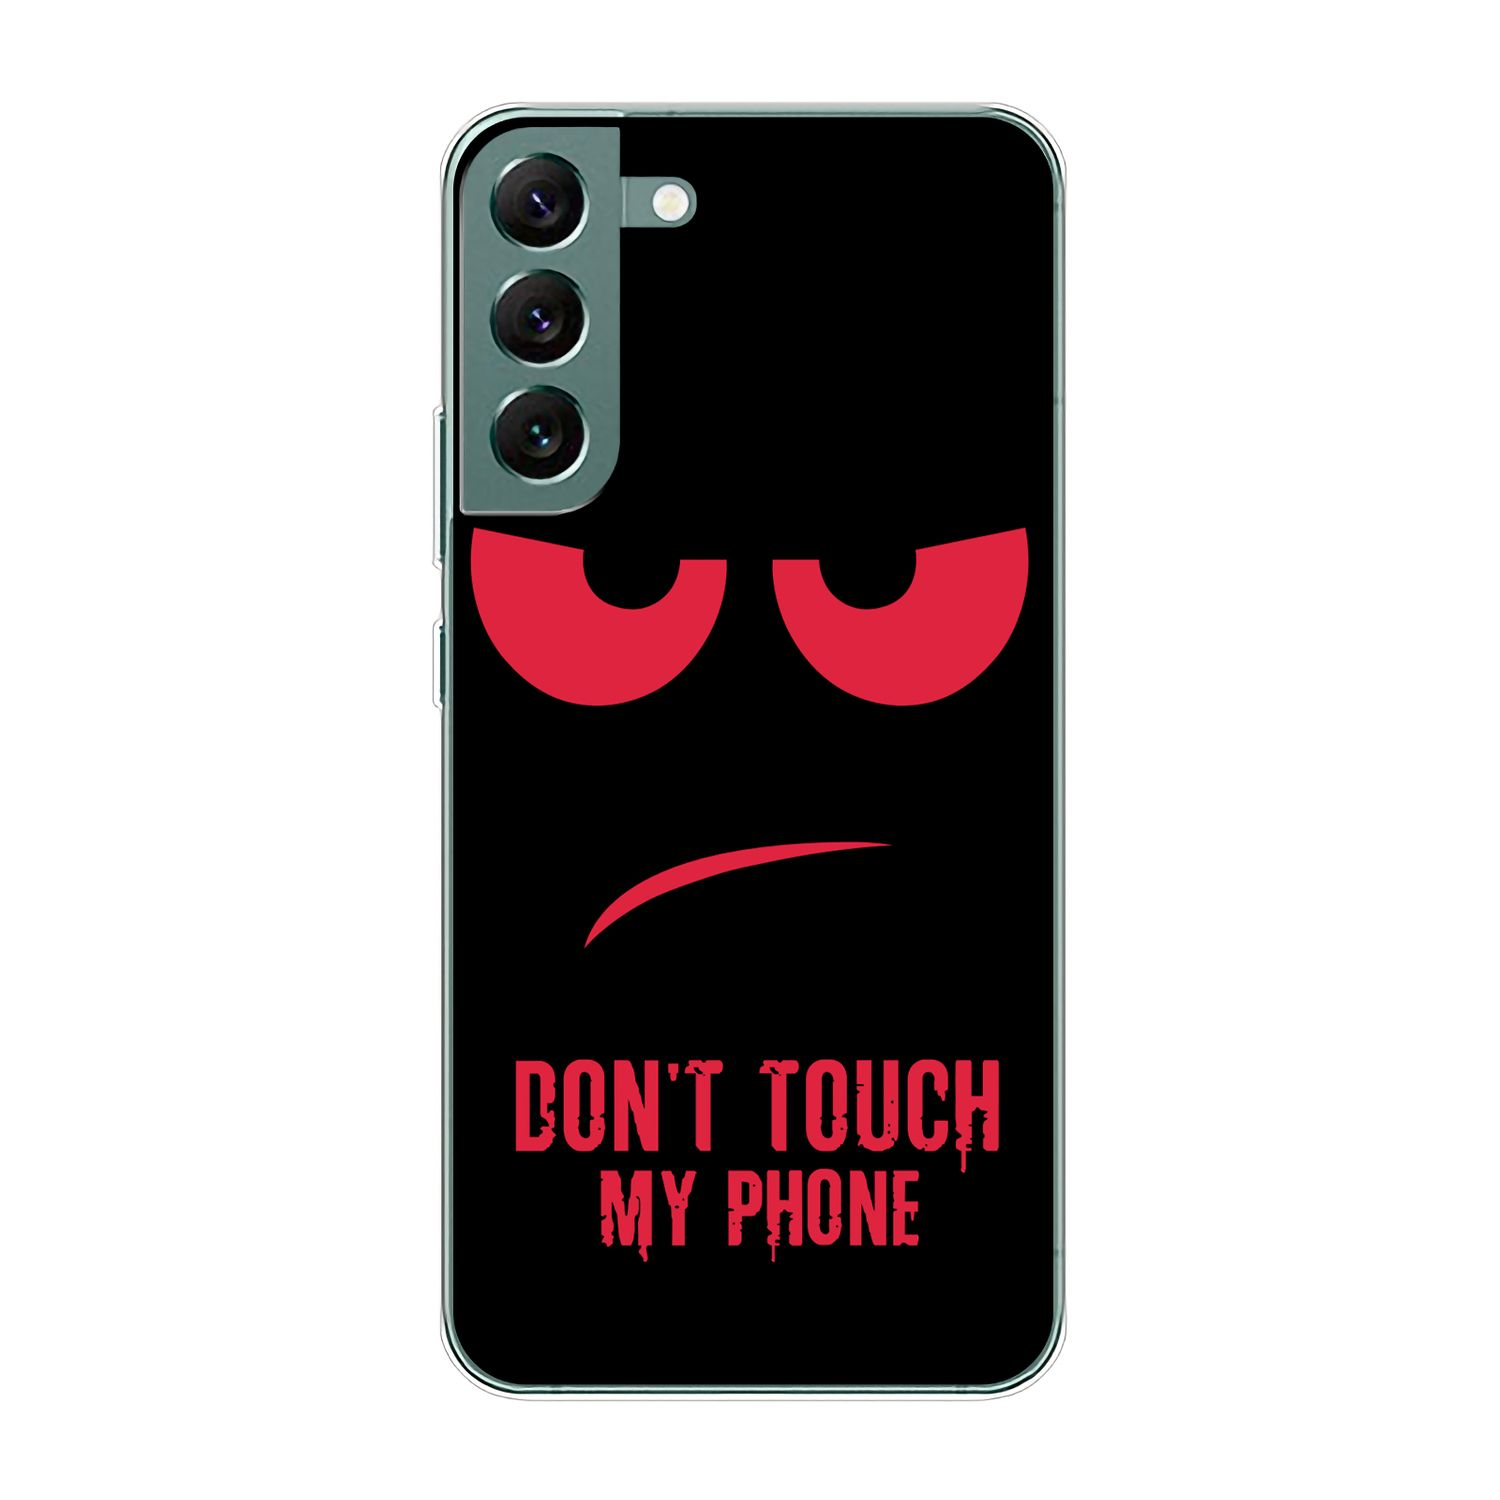 S22 Touch Case, Samsung, Backcover, KÖNIG 5G, Dont DESIGN Galaxy My Rot Plus Phone